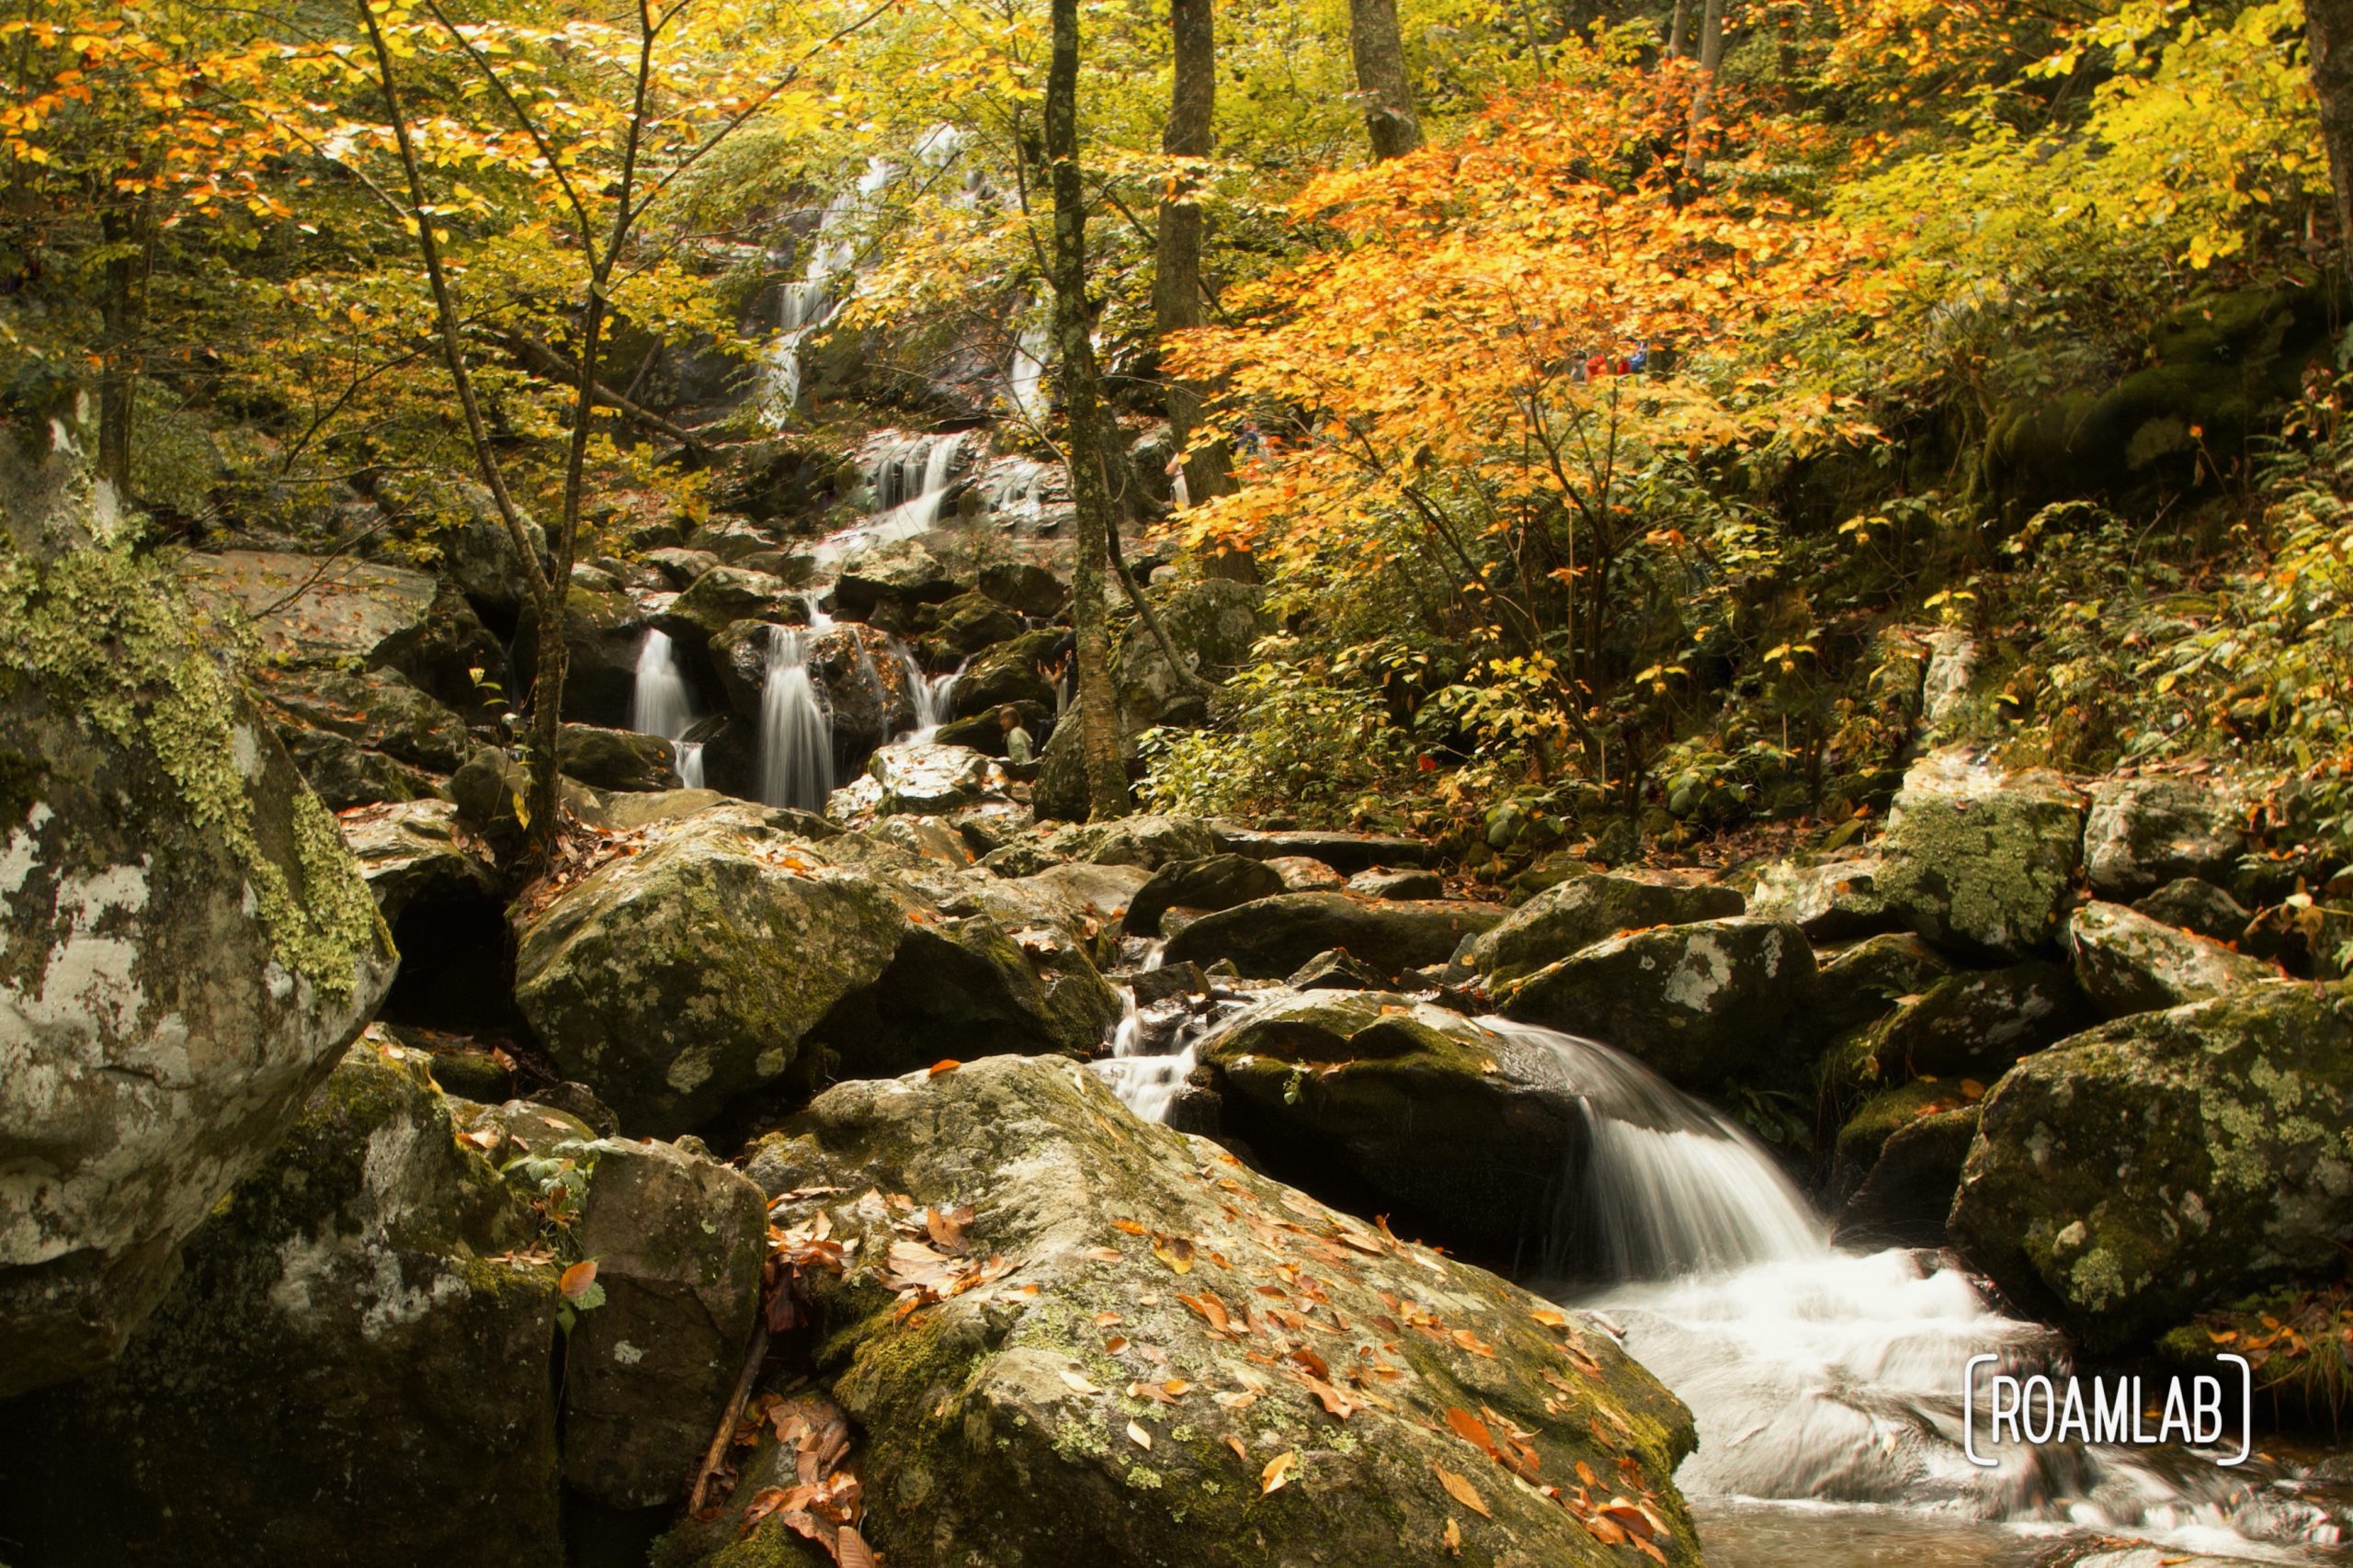 Fall colors view of the Dark Hollows Falls in Shenandoah National Park.